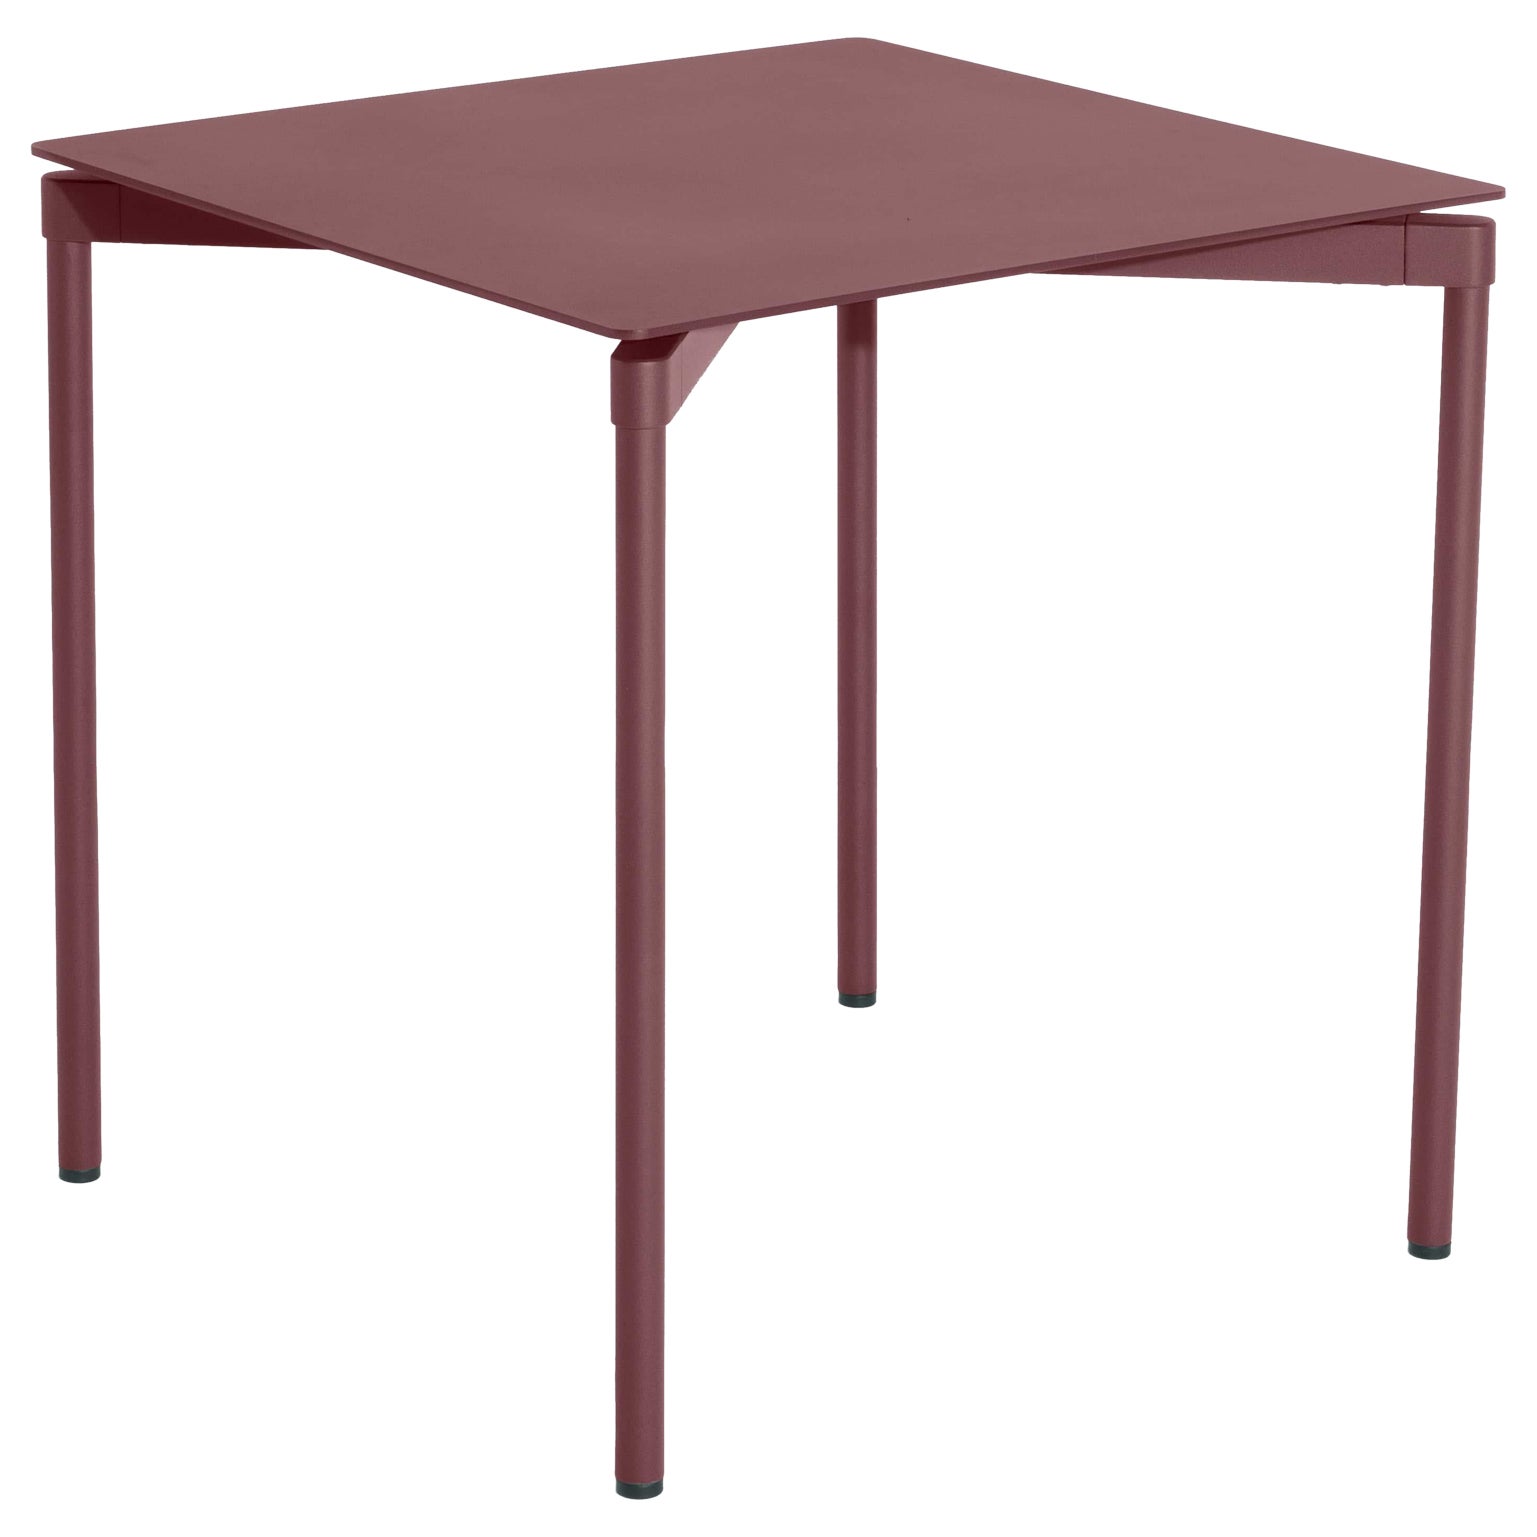 Petite Friture Fromme Square Table in Brown-Red Aluminium by Tom Chung